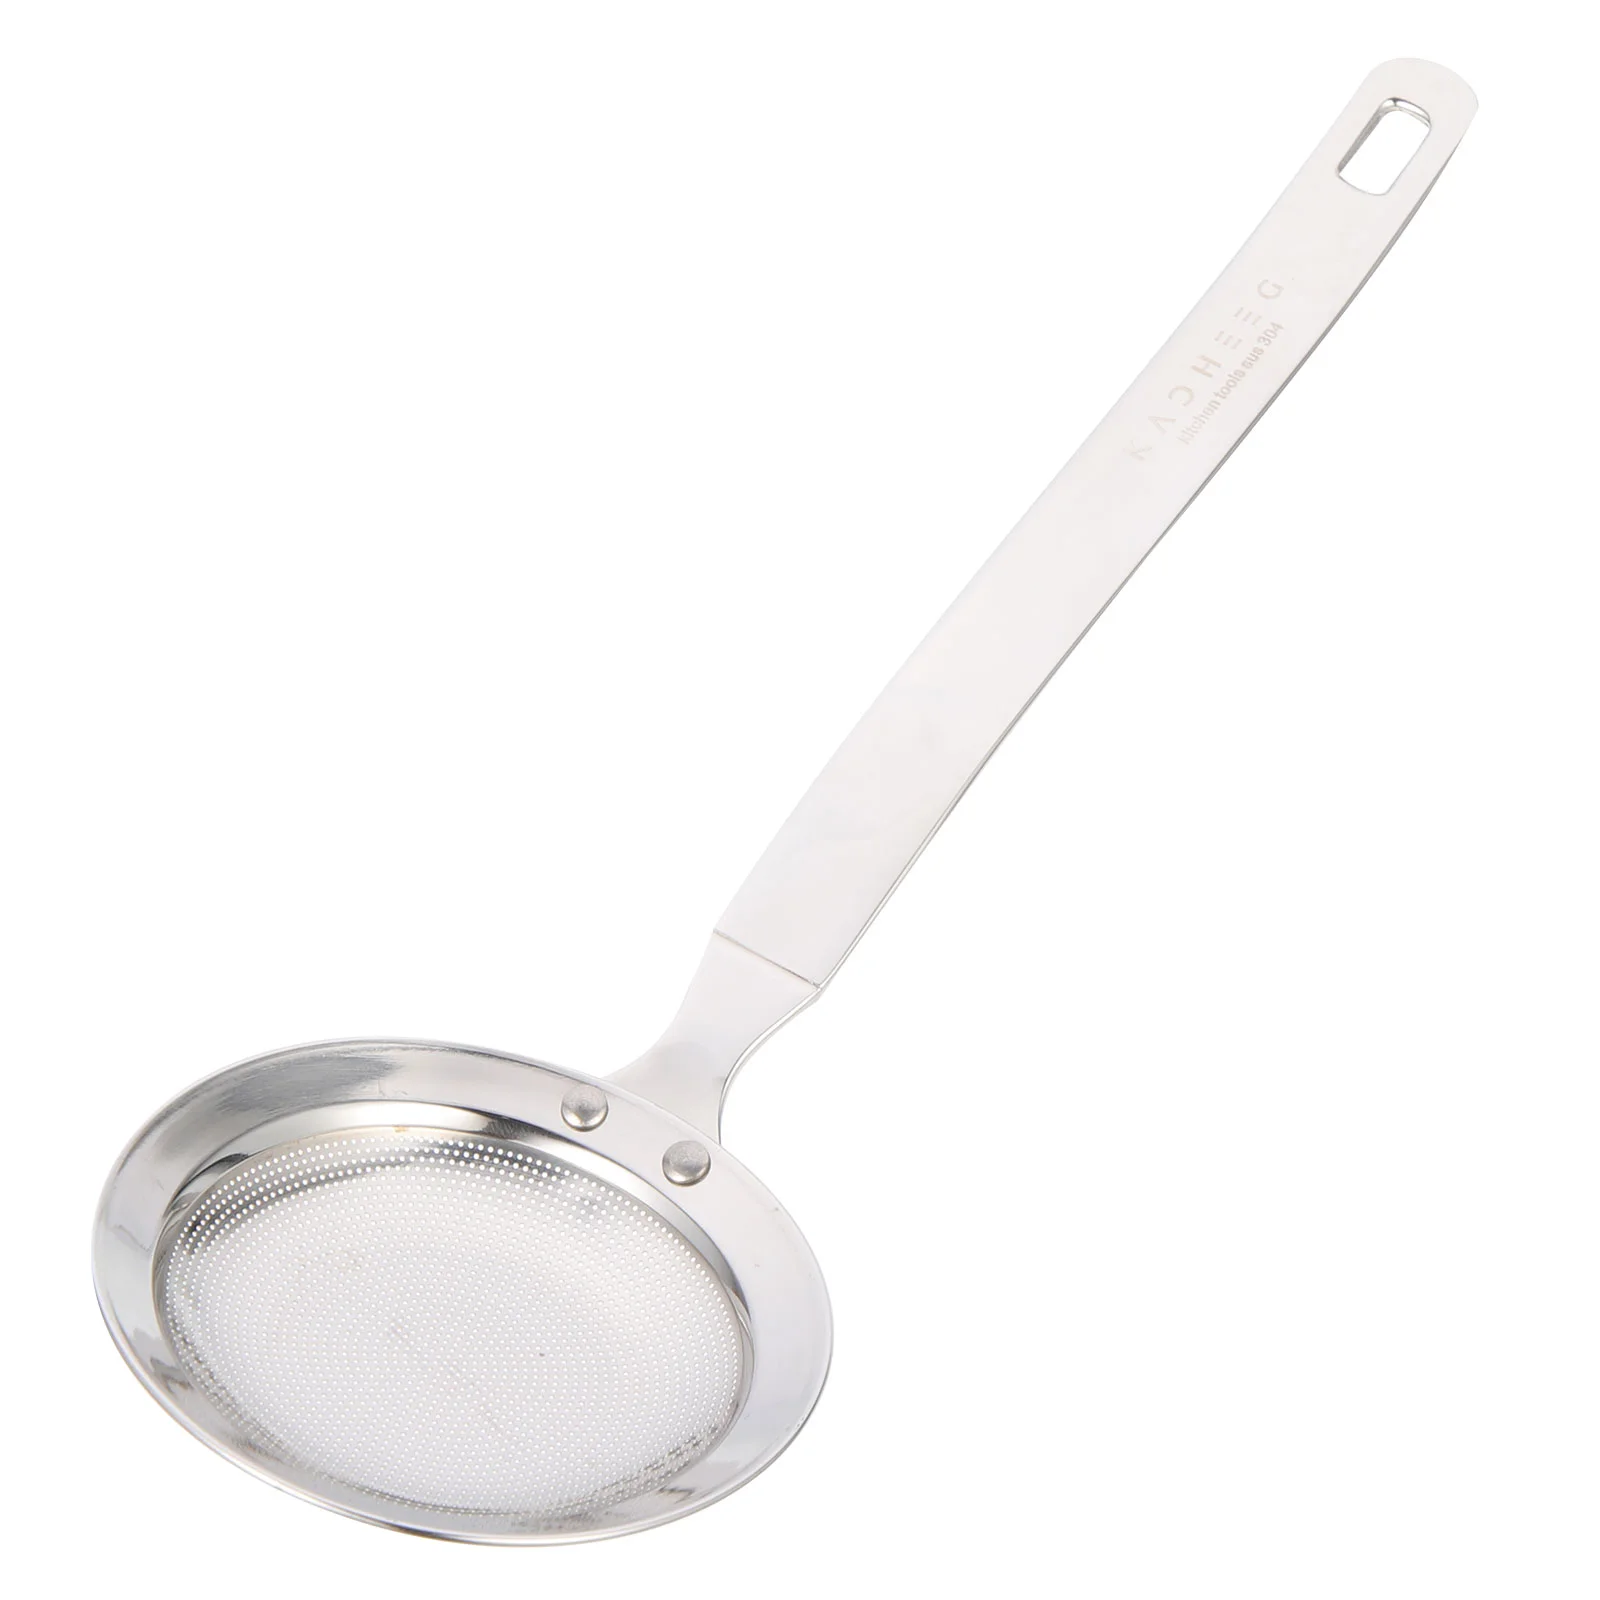 

Strainer Ladle Spoon Skimmer Cooking Oil Soup Serving Kitchen Frying Colander Grease Sauce Fat Professional Mesh Skimming